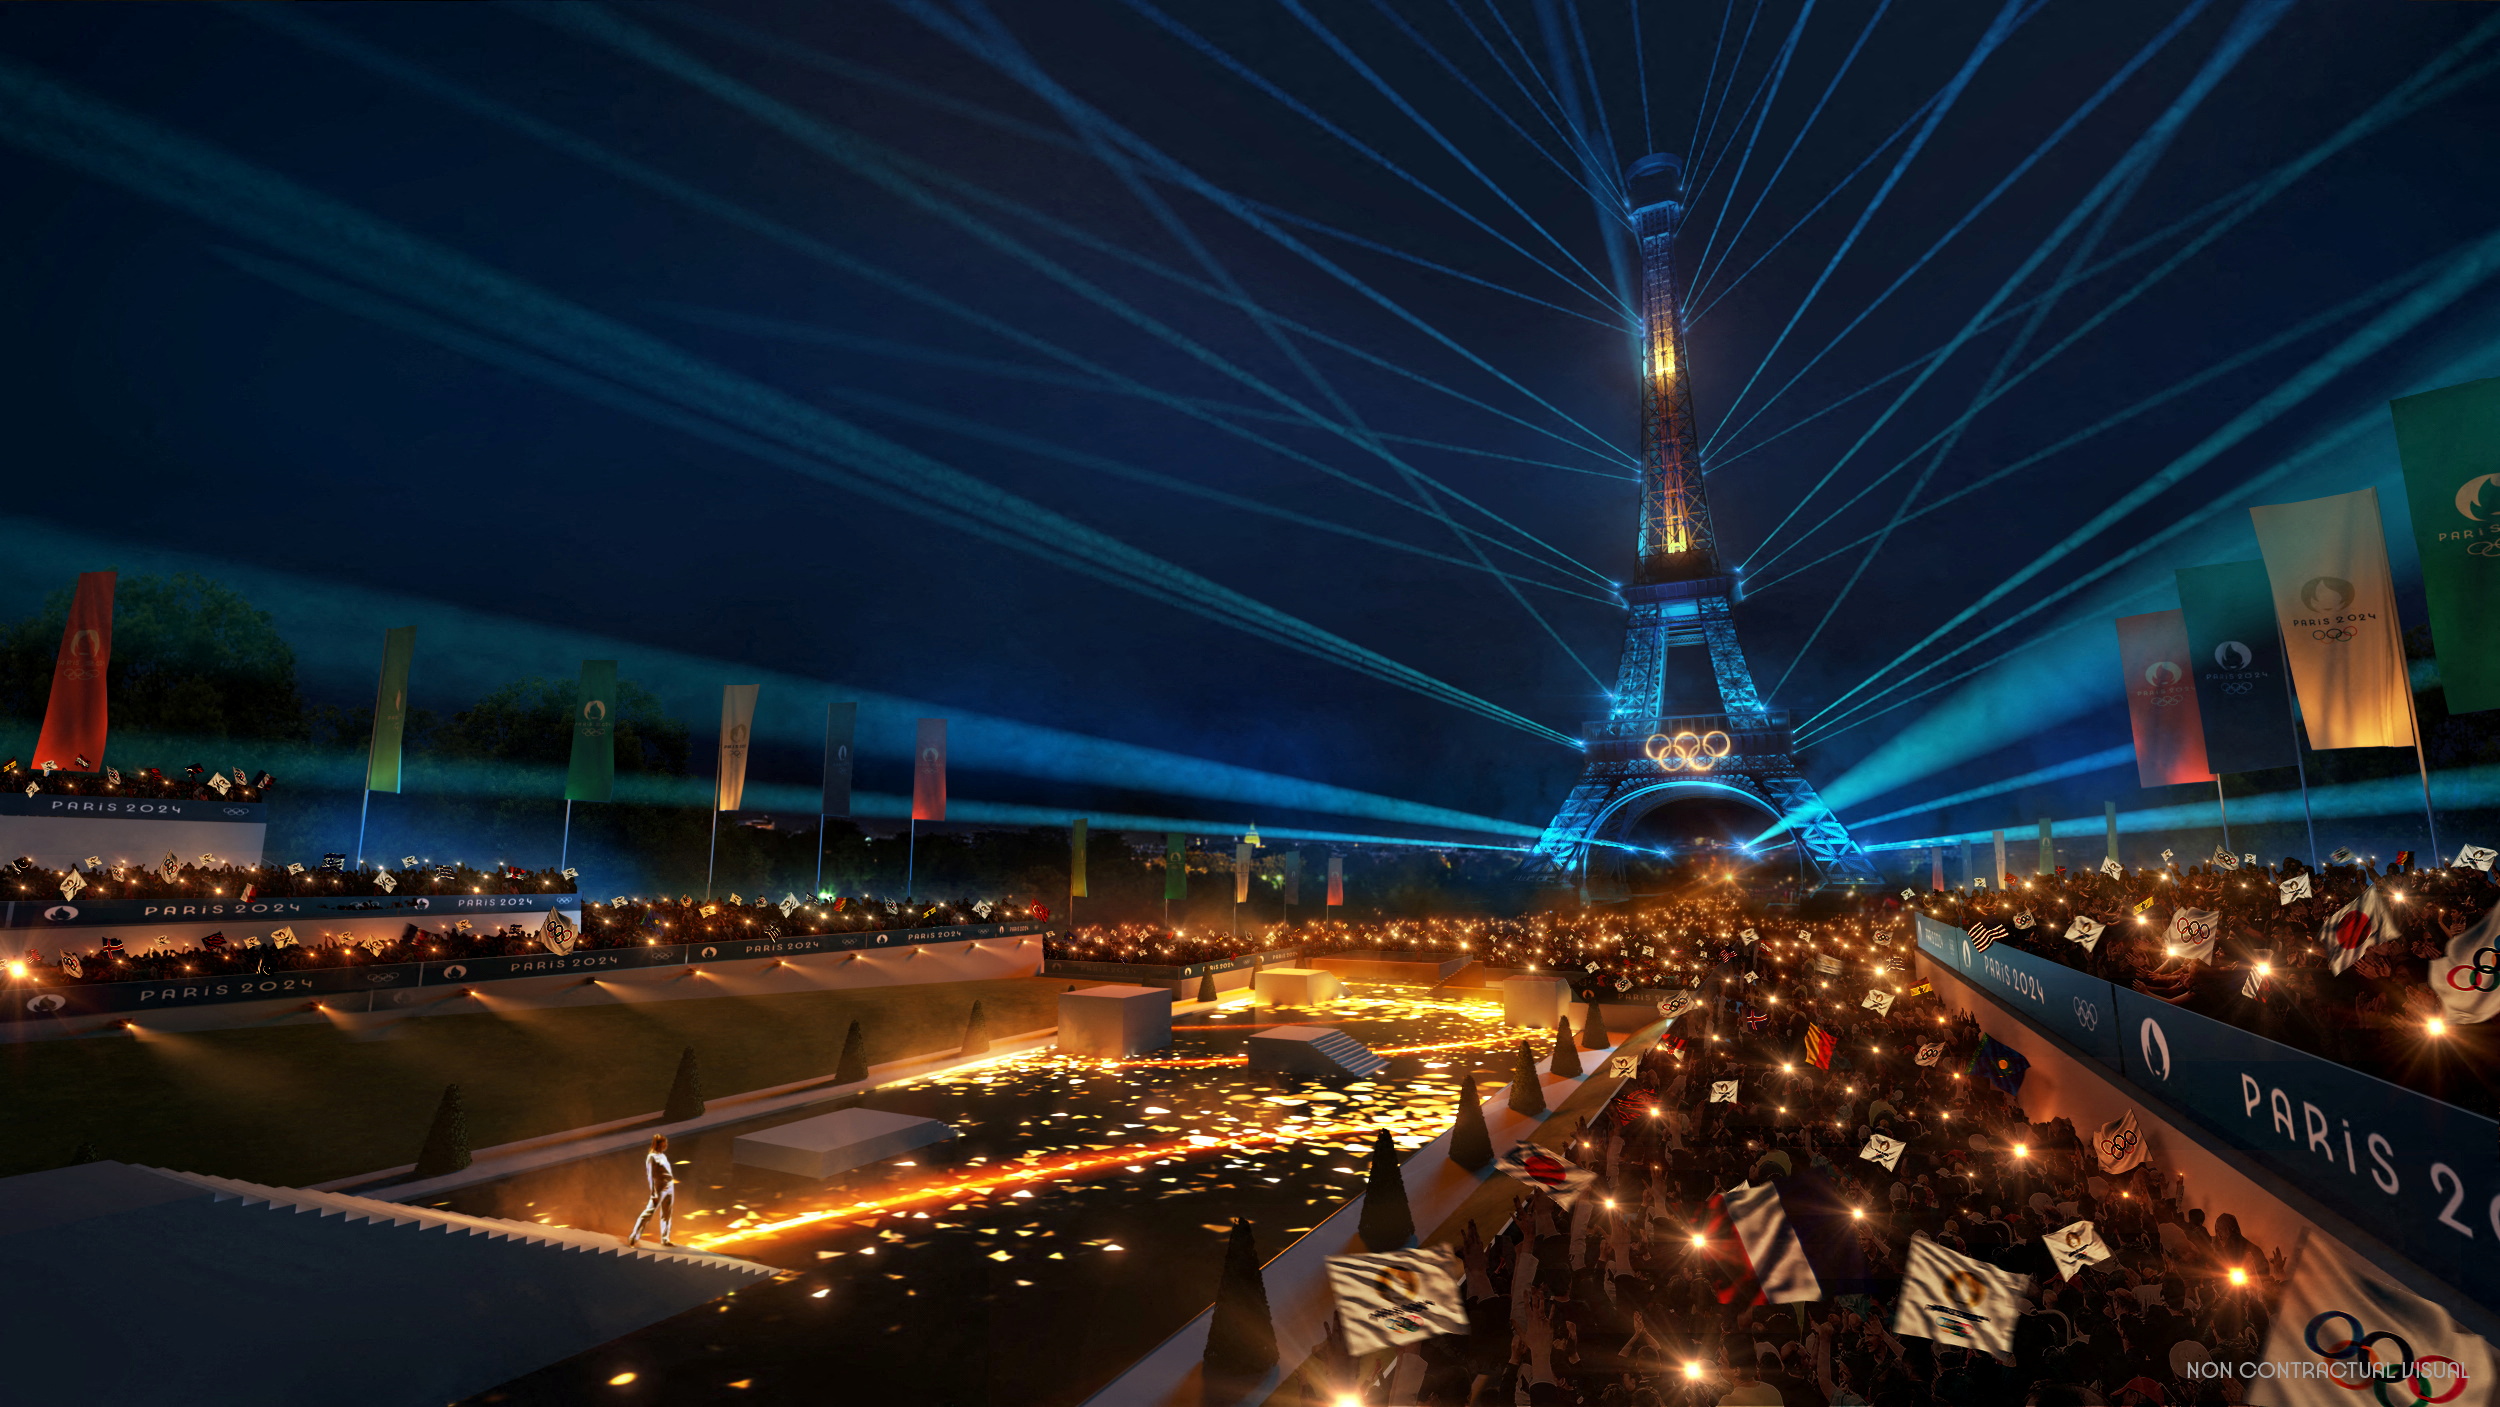 Paris 2024 organisers expect 600,000 at Seine opening ceremony Reuters